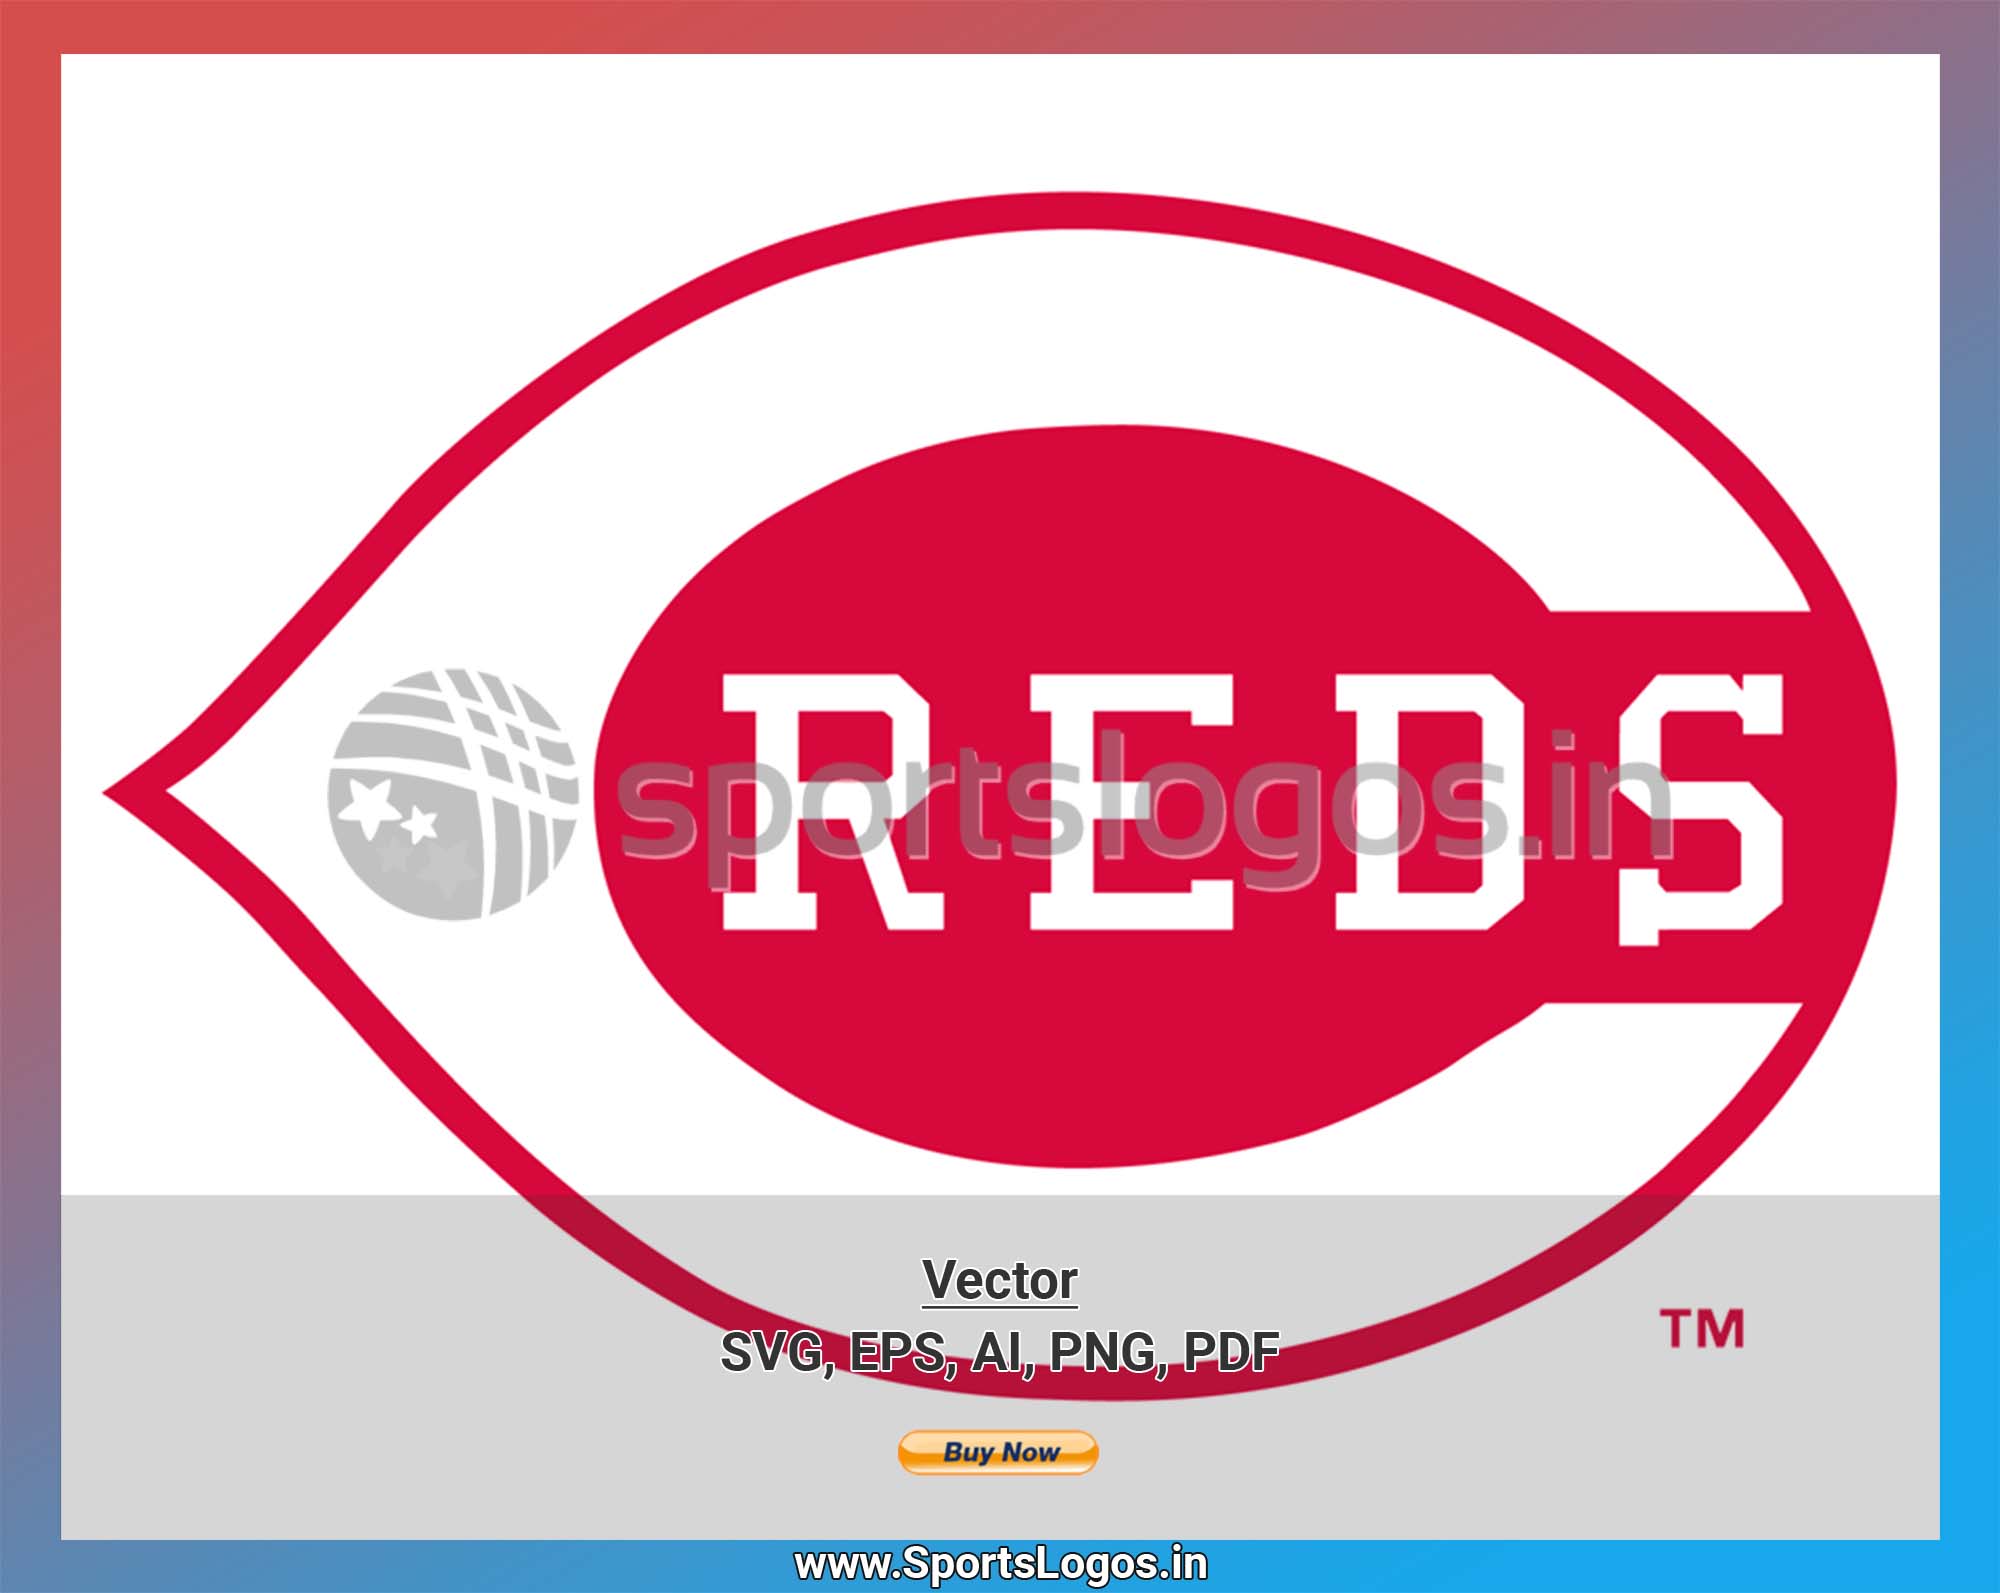 Cincinnati Reds - Baseball Sports Vector SVG Logo in 5 formats - SPLN000890  • Sports Logos - Embroidery & Vector for NFL, NBA, NHL, MLB, MiLB, and more!